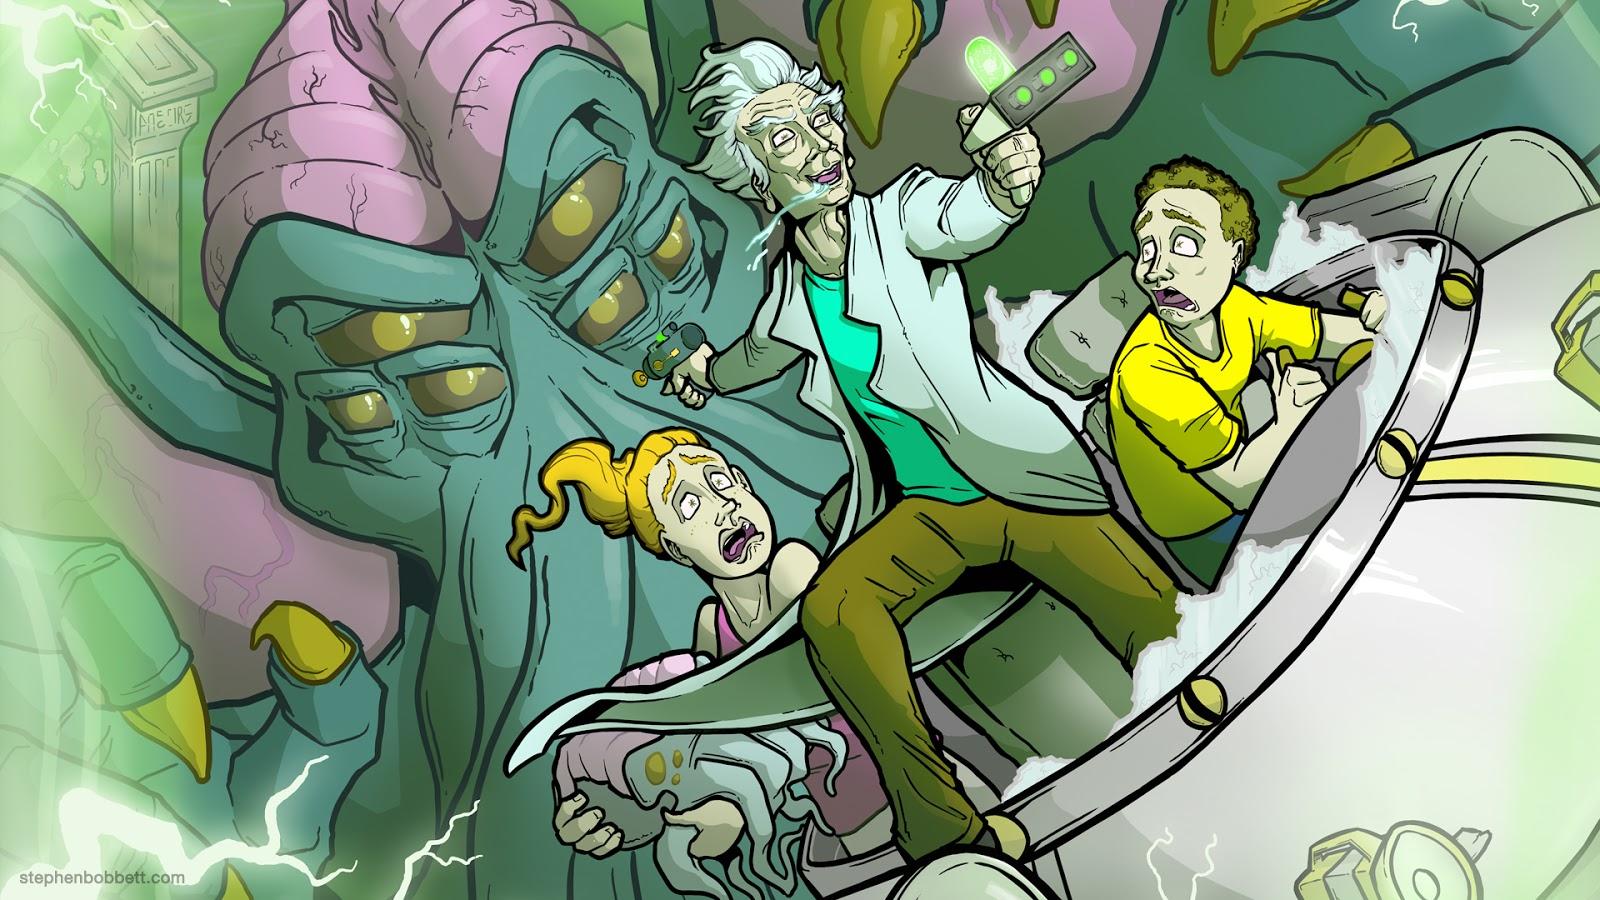 1080p Rick and Morty HD Wallpaper (2020) HD Background